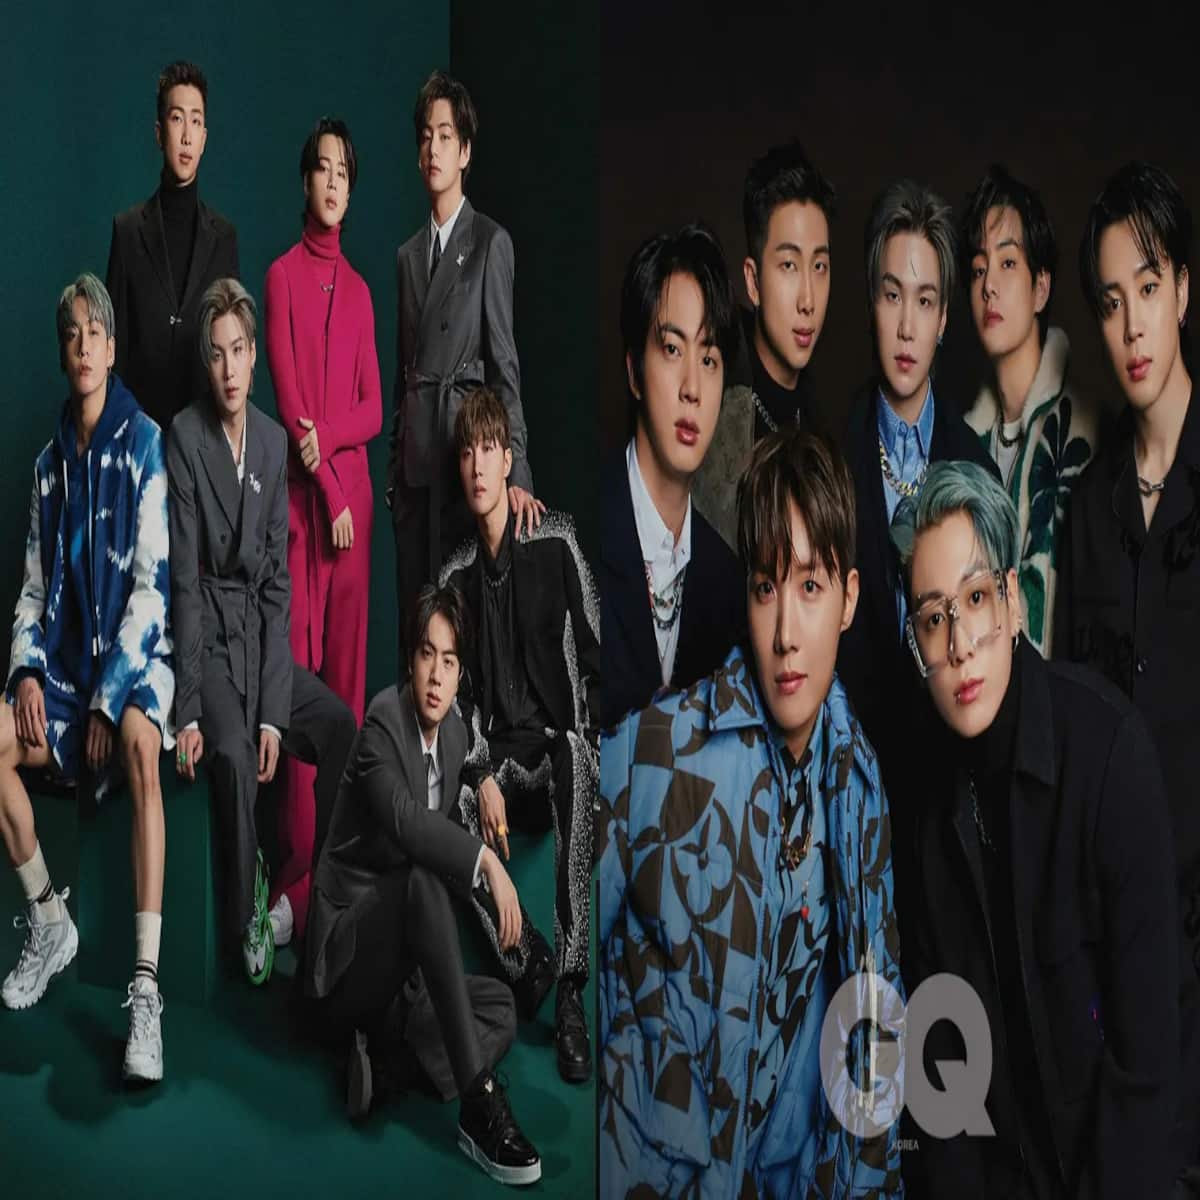 BTS X Vogue X GQ Korea: RM, V, Jimin, Suga And Others Make ARMY Scream 'Daddy' As They Give Professional Models A Run For Their Money In Show Stopping Photohoot